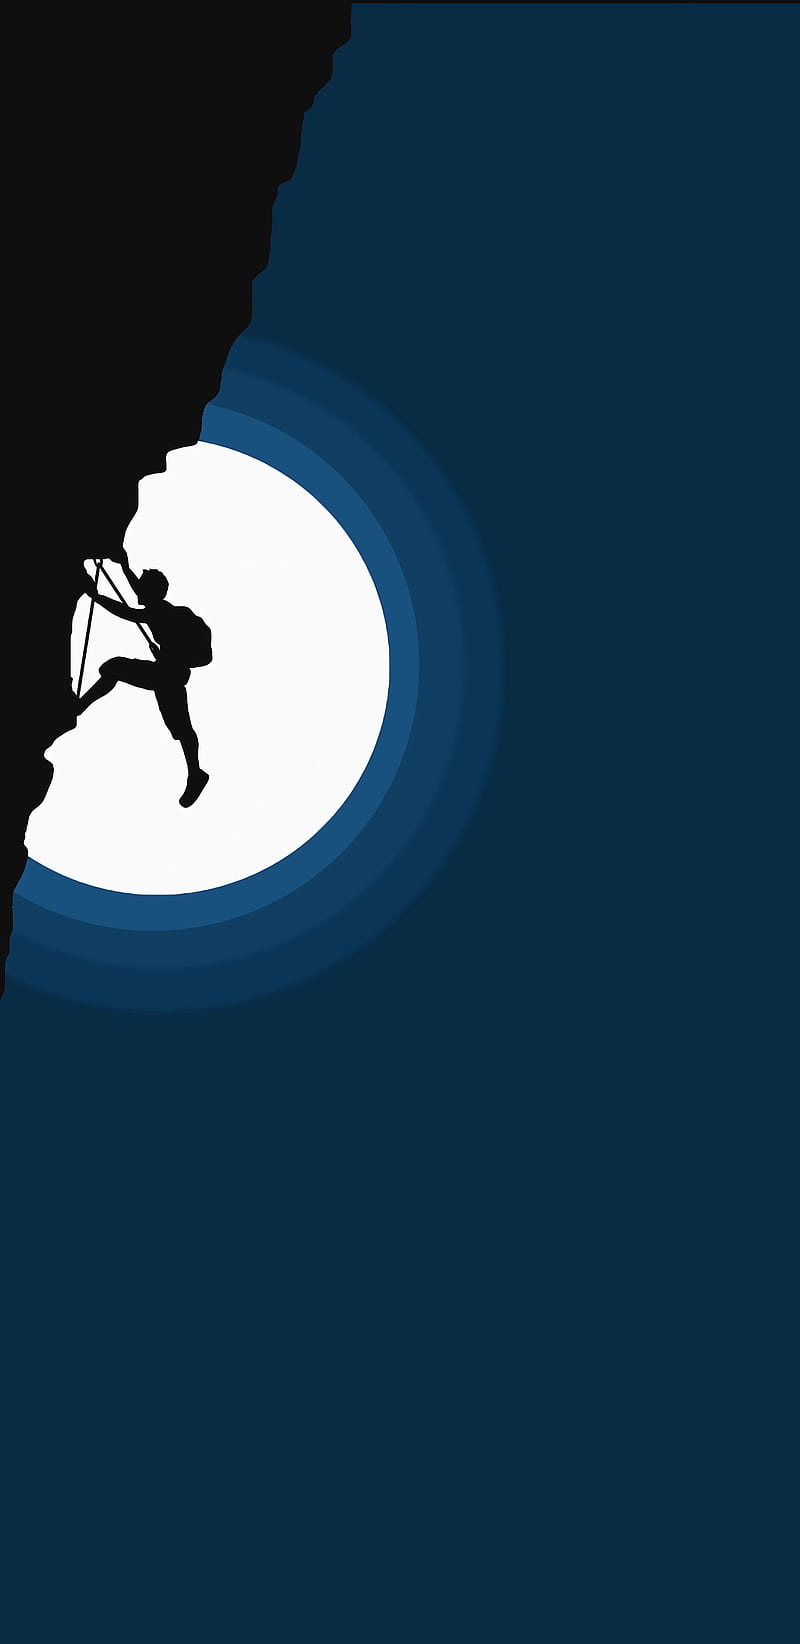 IPhone wallpaper of a man rock climbing in the moonlight - Minimalist, clean, illustration